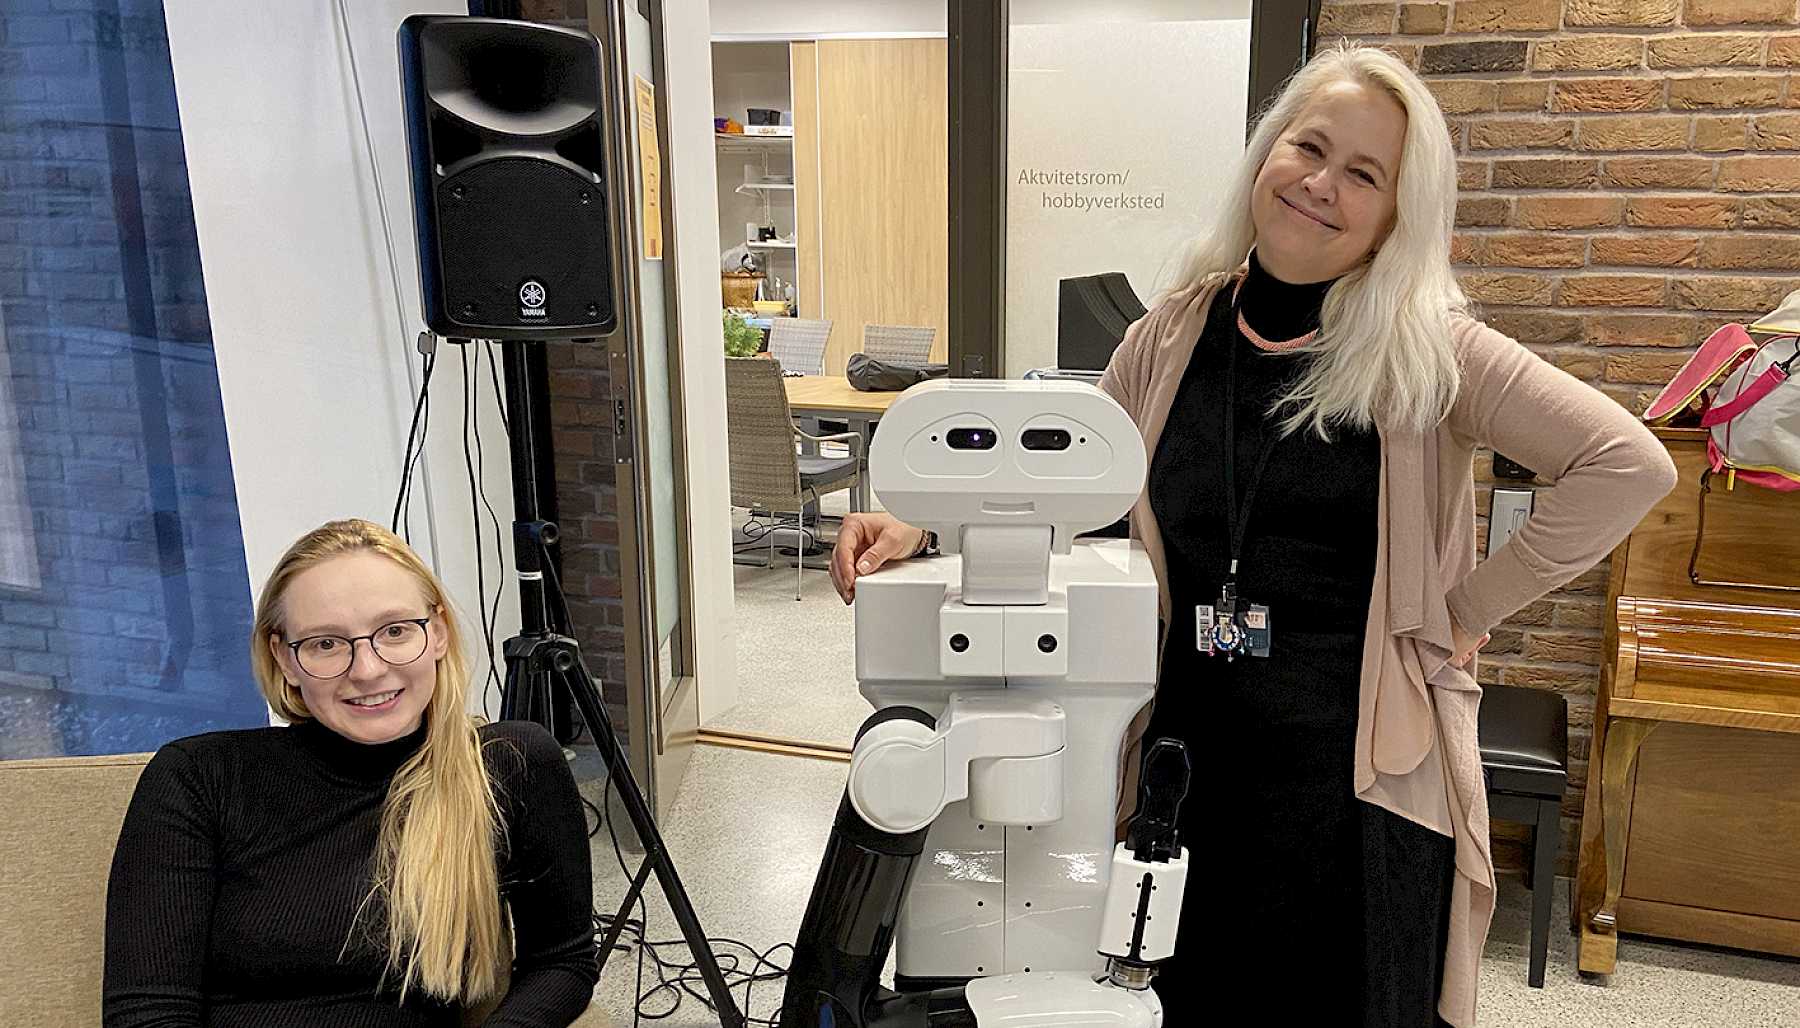 The two persons stand with a robot between them